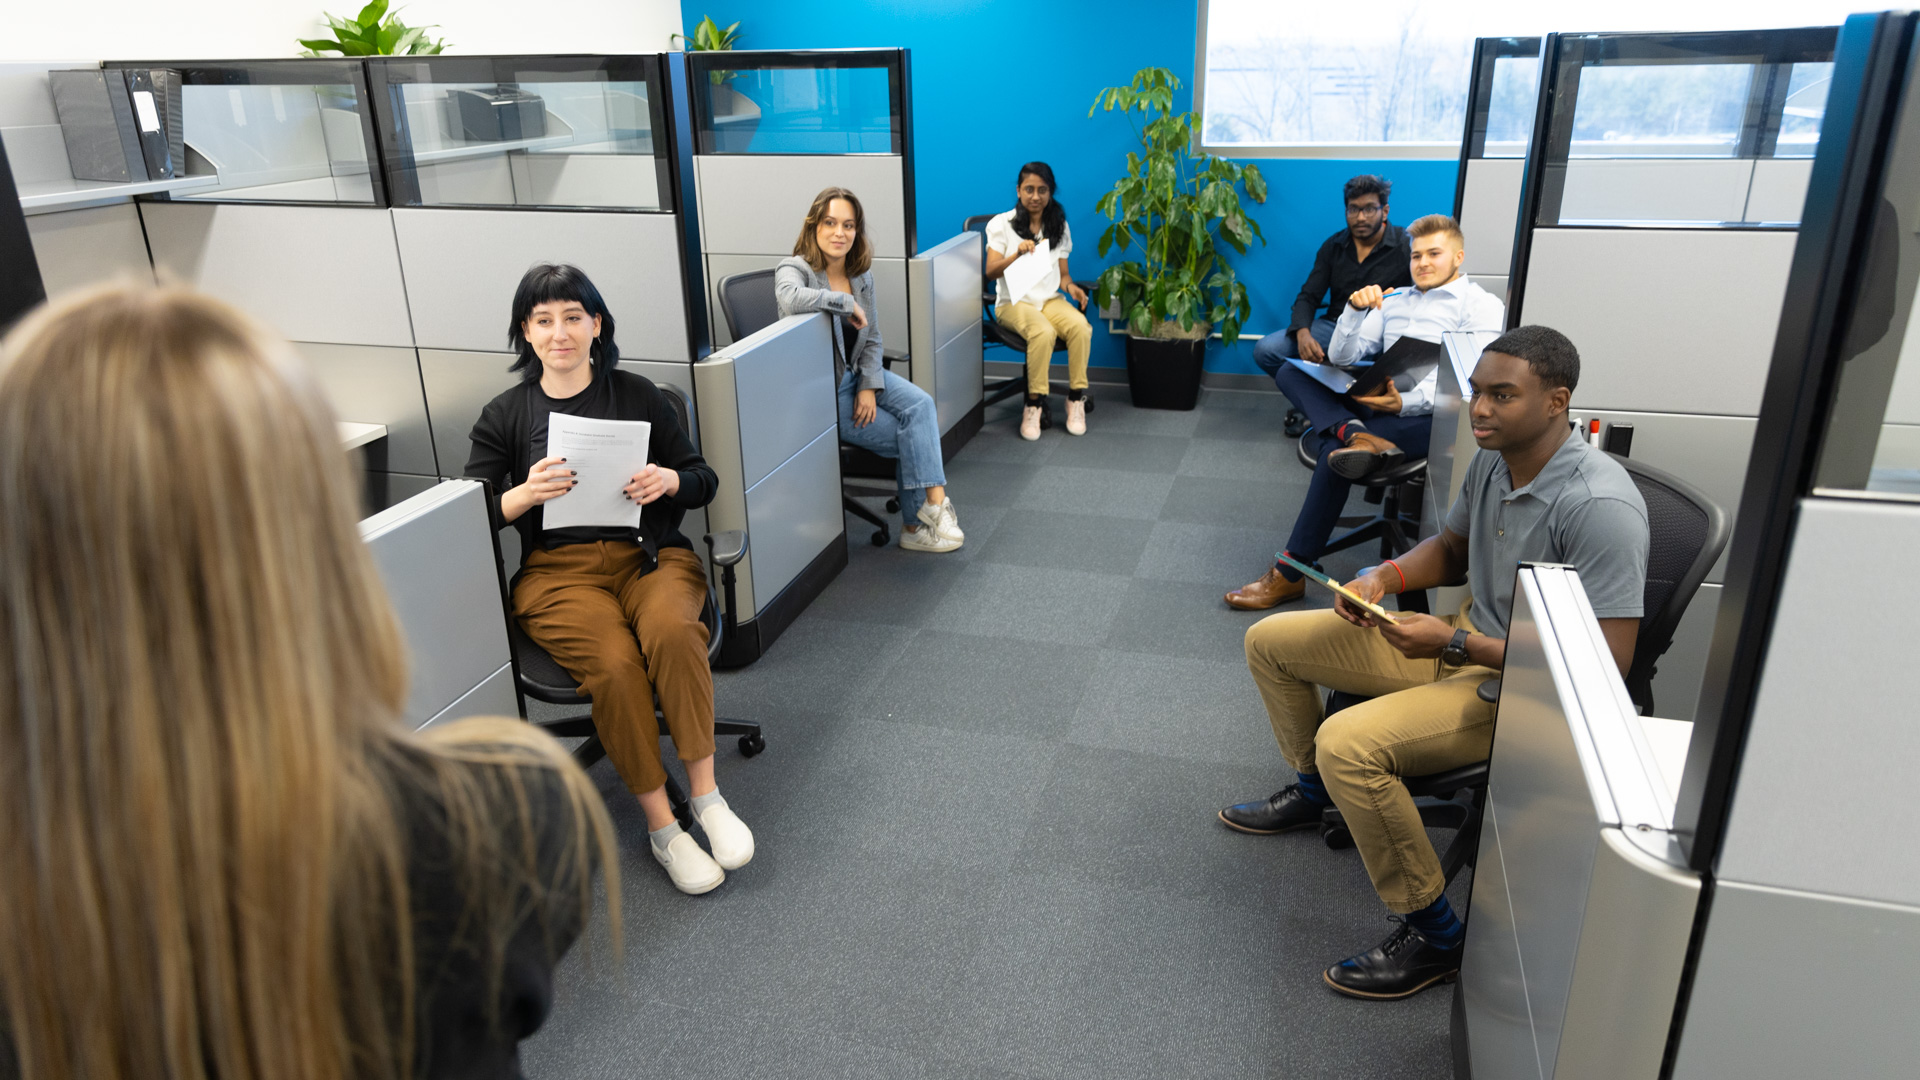 A group of staff sits at the edge of their pods to look at a blonde woman speaking in front of them at the Bioscience and Technology Business Incubator in Lawrence, KS.